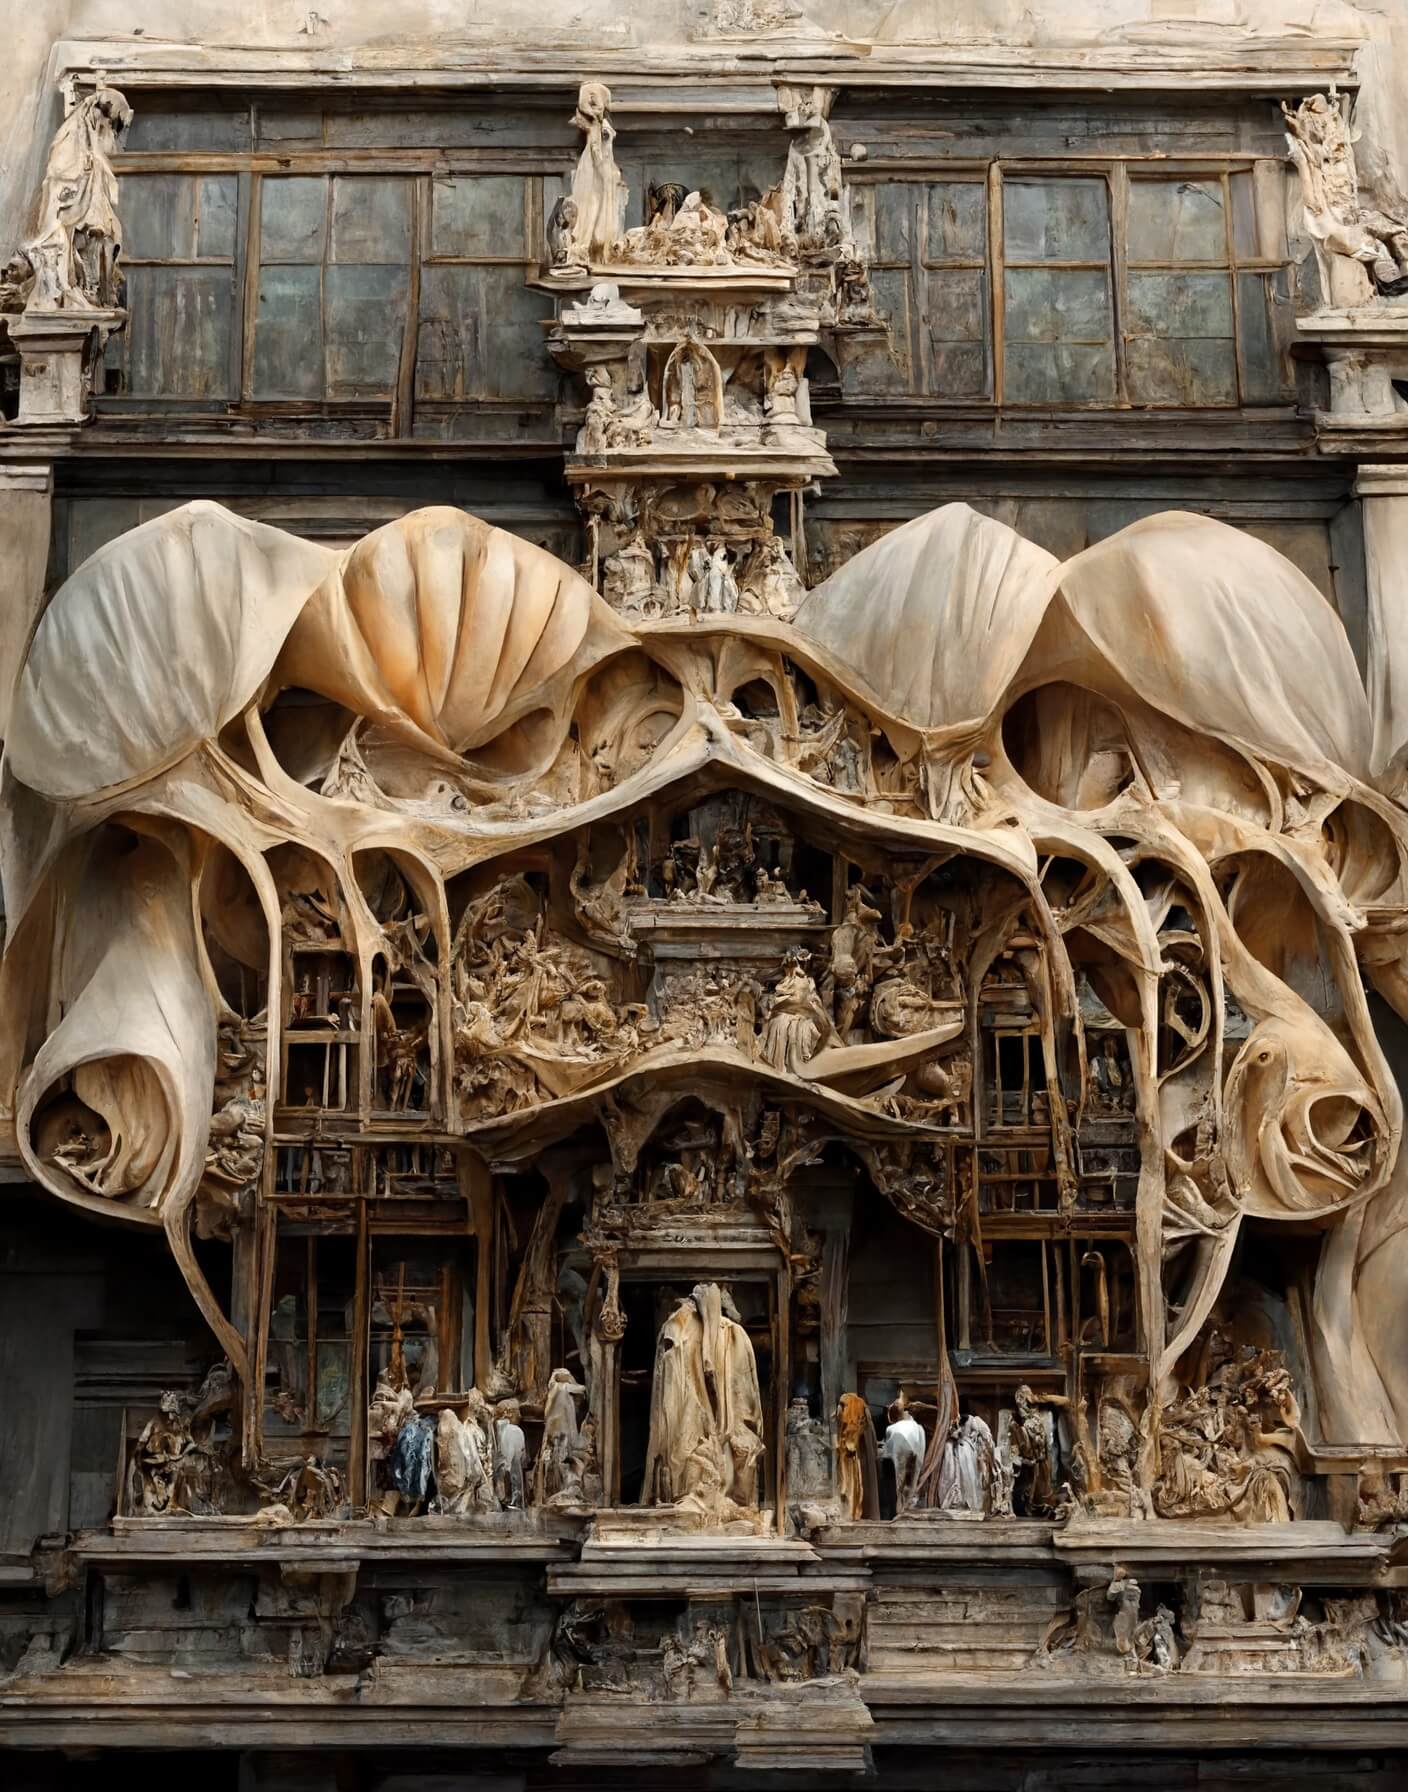 Renaissance and Baroque Facades Experiments with Tensile Structure by Mohammad Qasim Iqbal + Midjourney